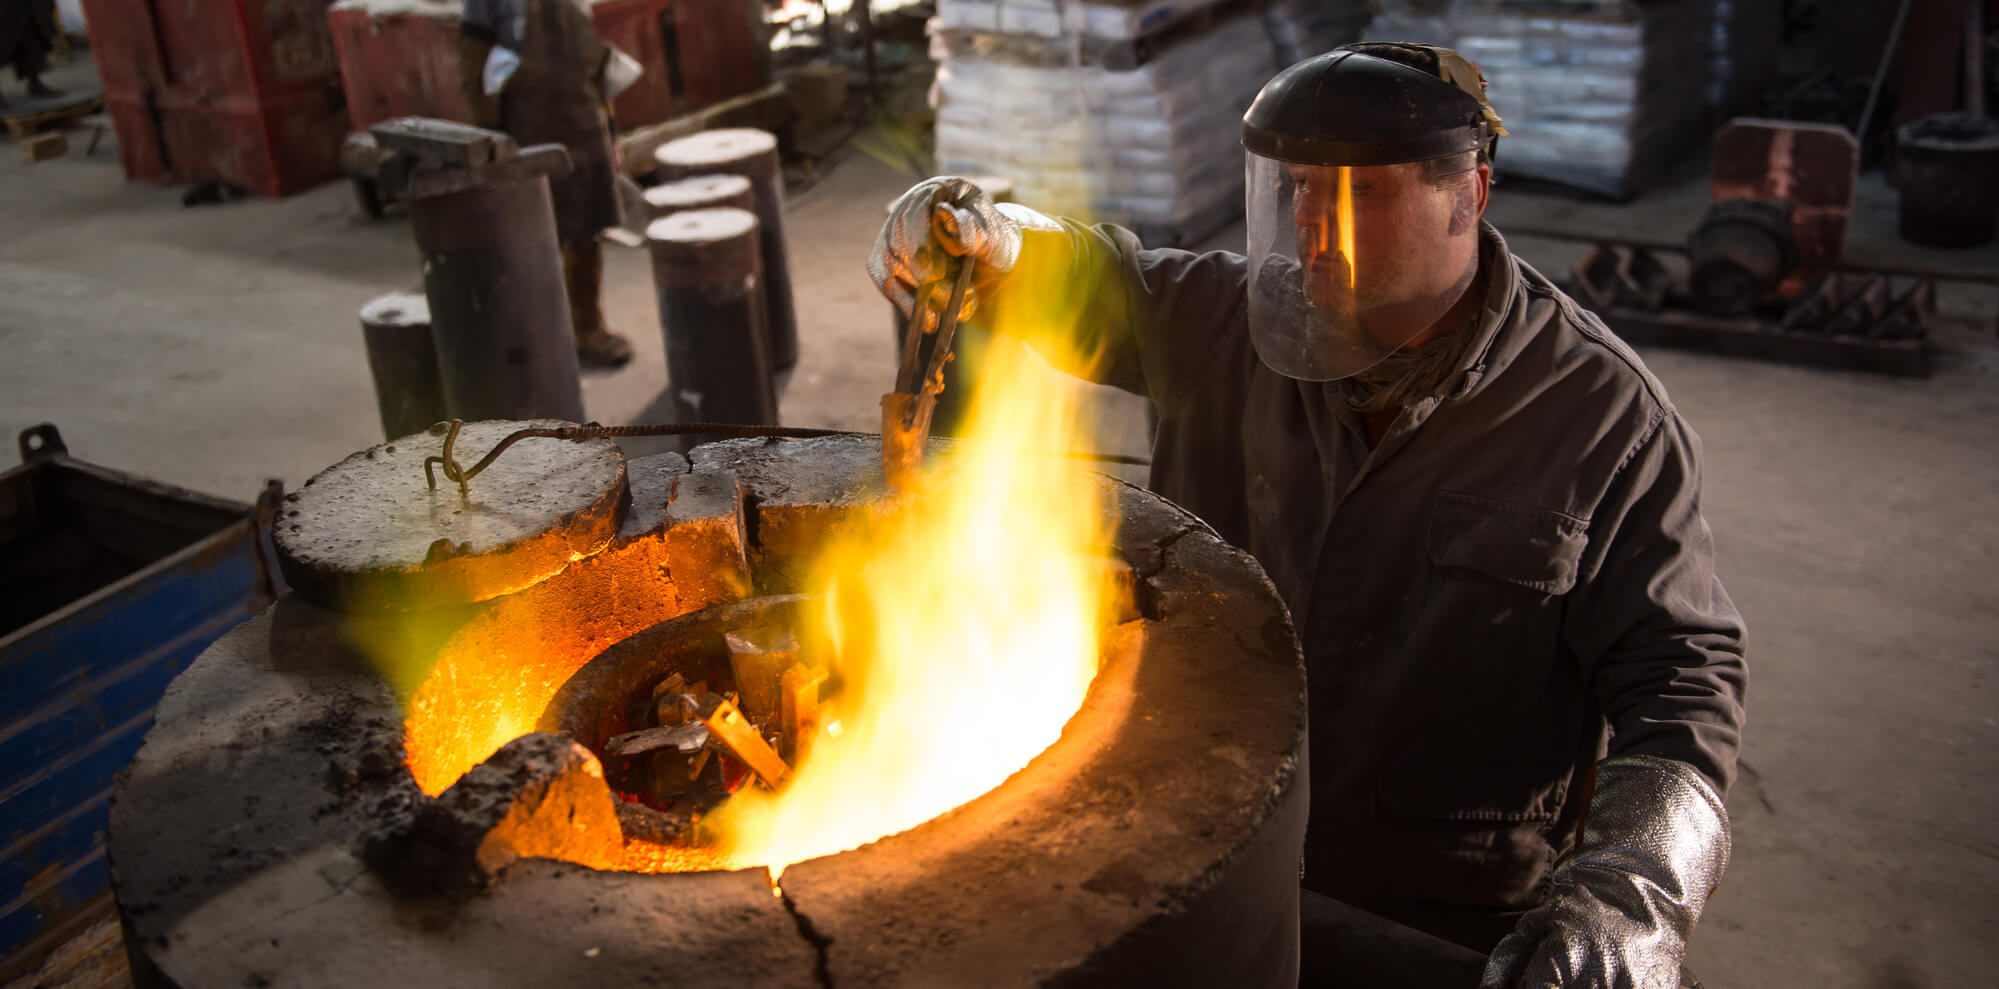 How Does Metal Forging Play a Role in Civil Engineering?